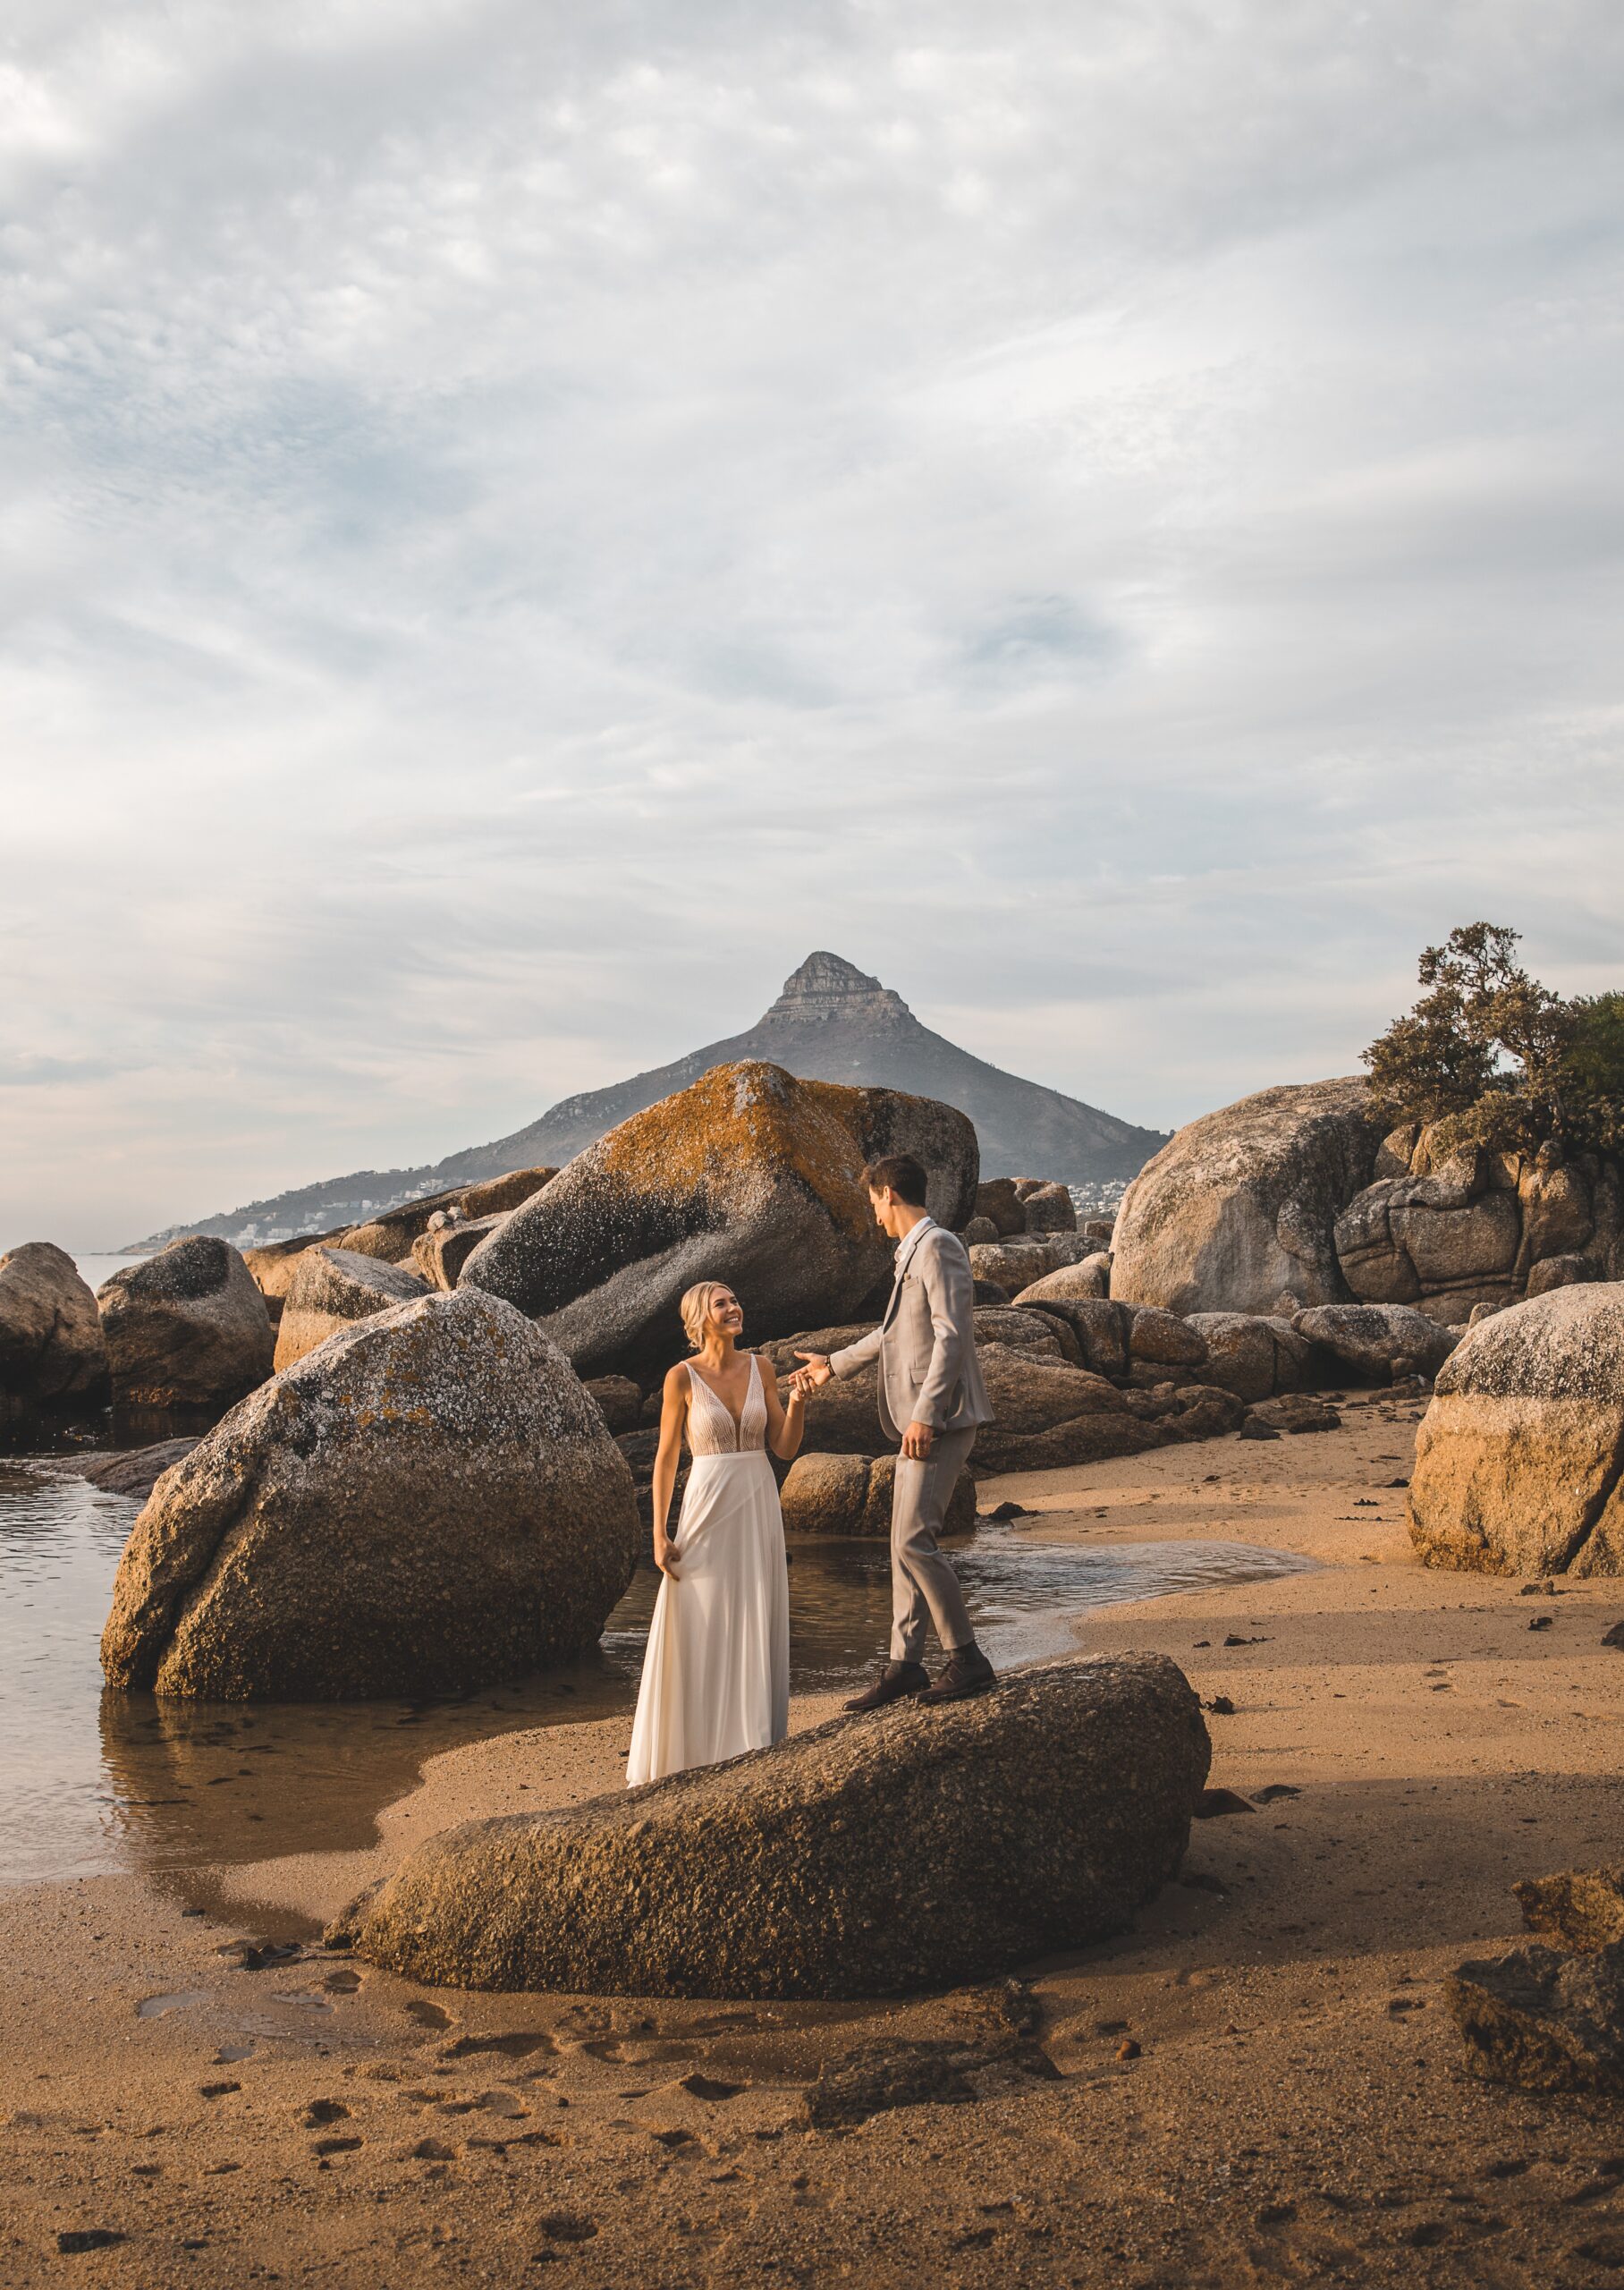 Cape Town Elopement photographer. Couple eloping on Camps bay beach in South Africa